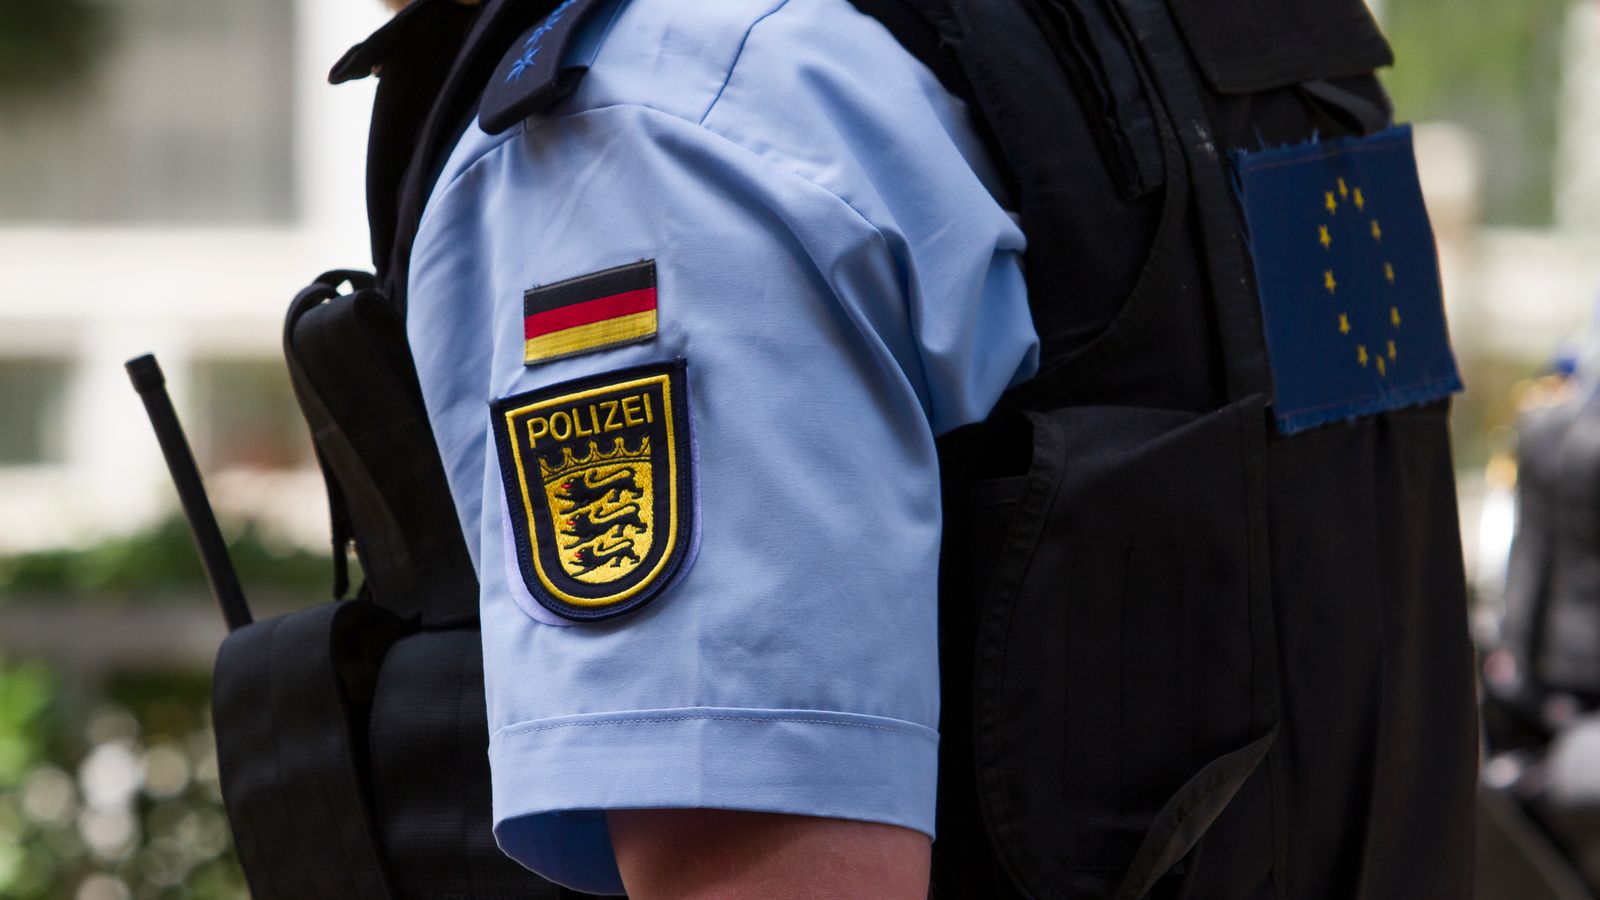 germany-250-guns-and-thousands-of-rounds-of-ammunition-seized-from-farright-sympathiser-world-news-sky-news